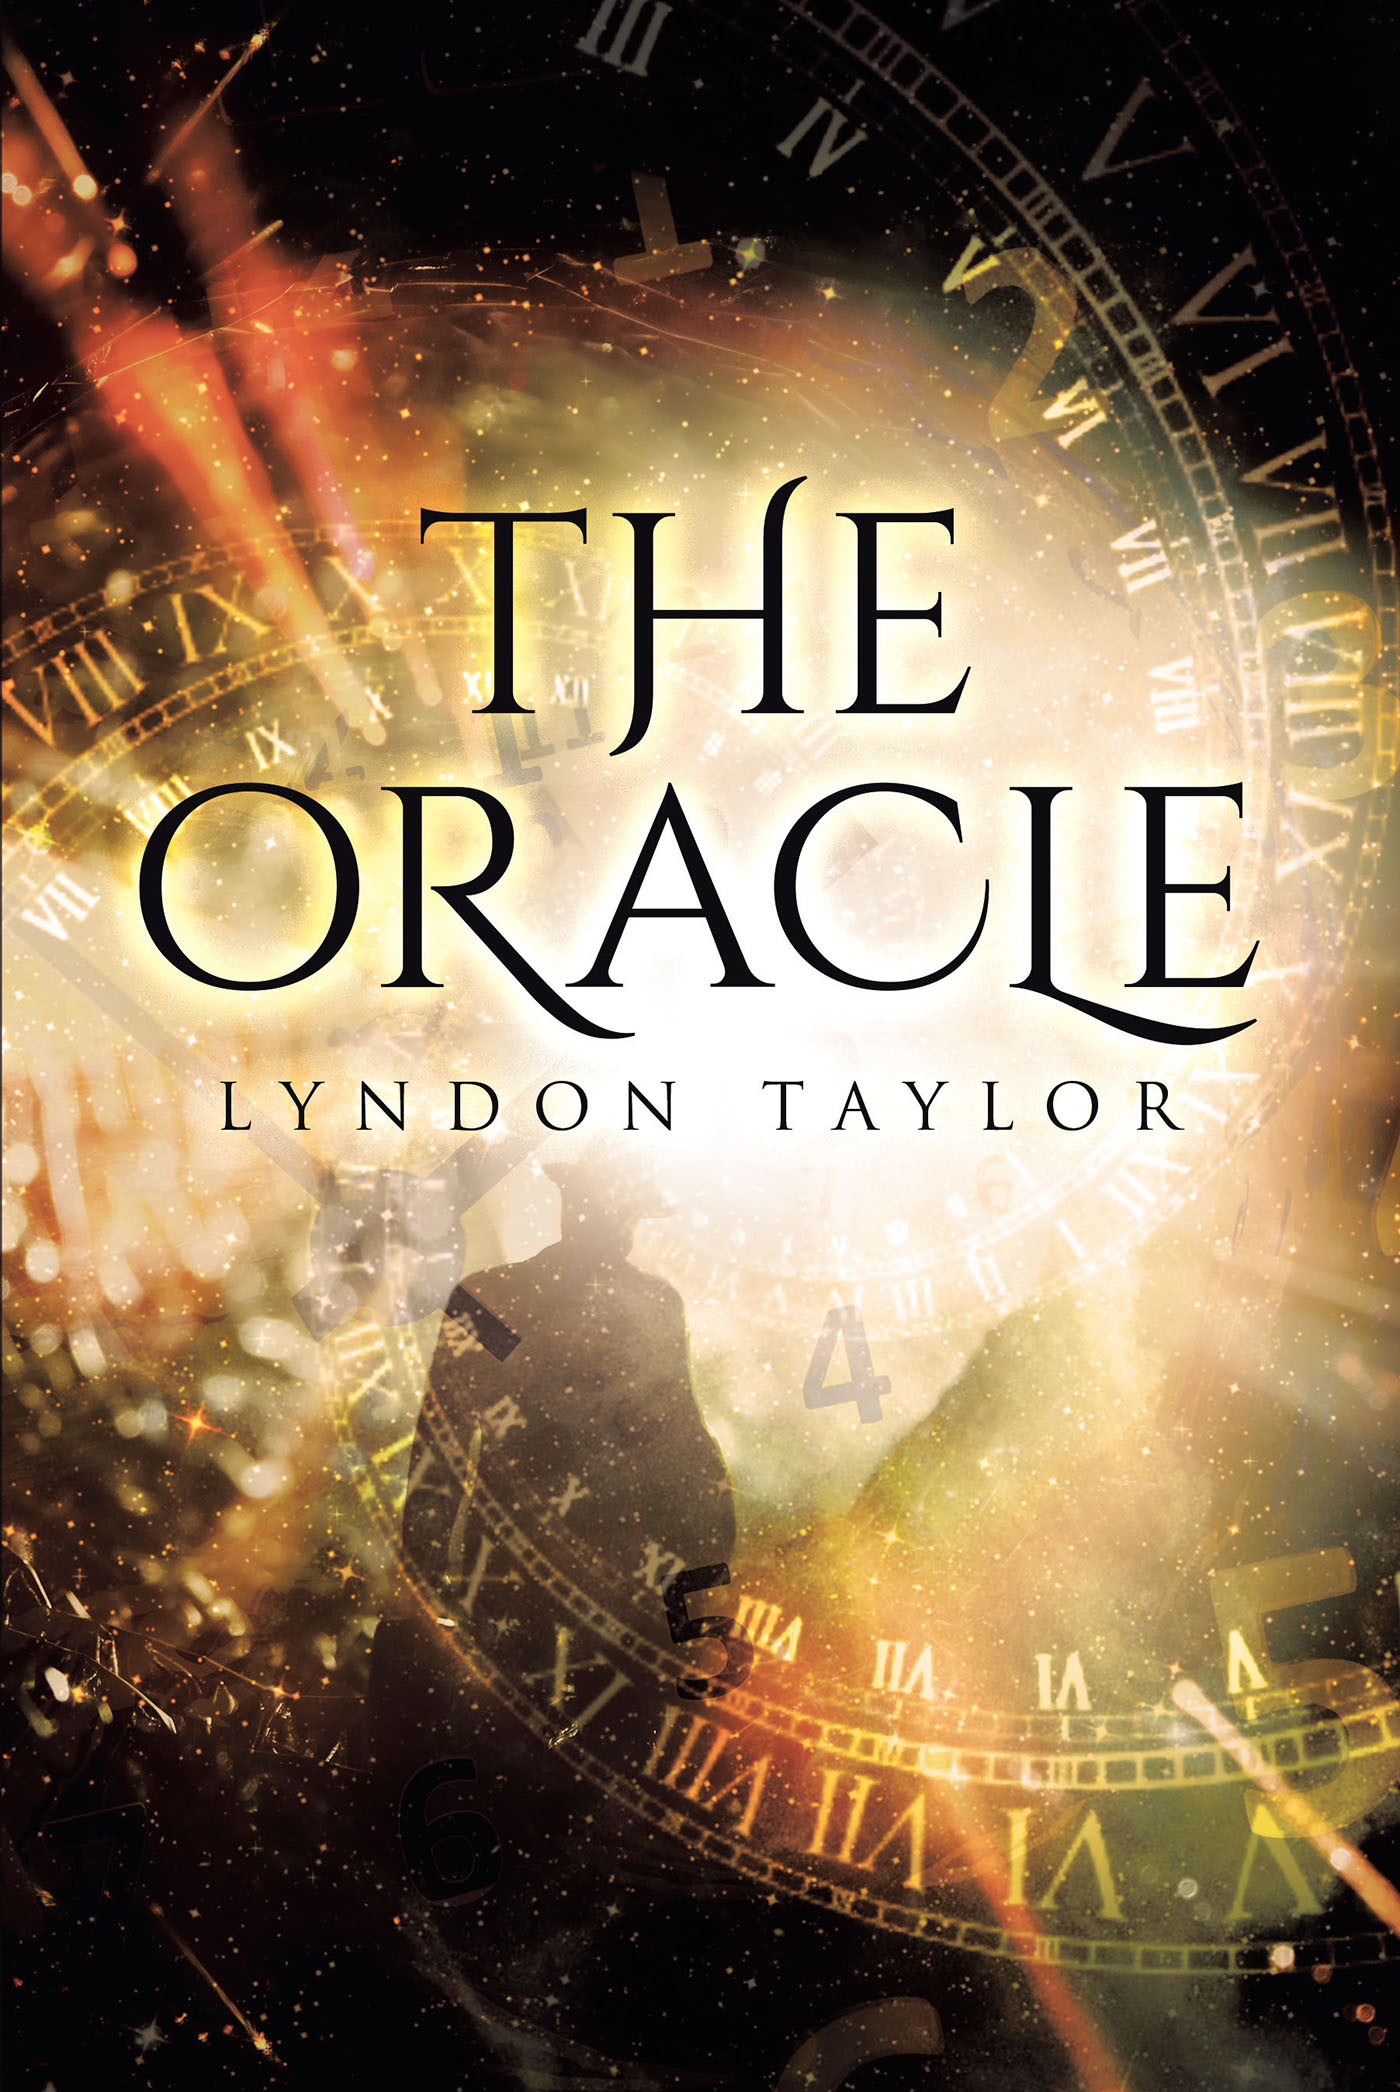 Author Lyndon Taylor’s New Book, "The Oracle," Follows a Twenty-First-Century Student of History Who Travels Back in Time to the Los Angeles of the 1930s